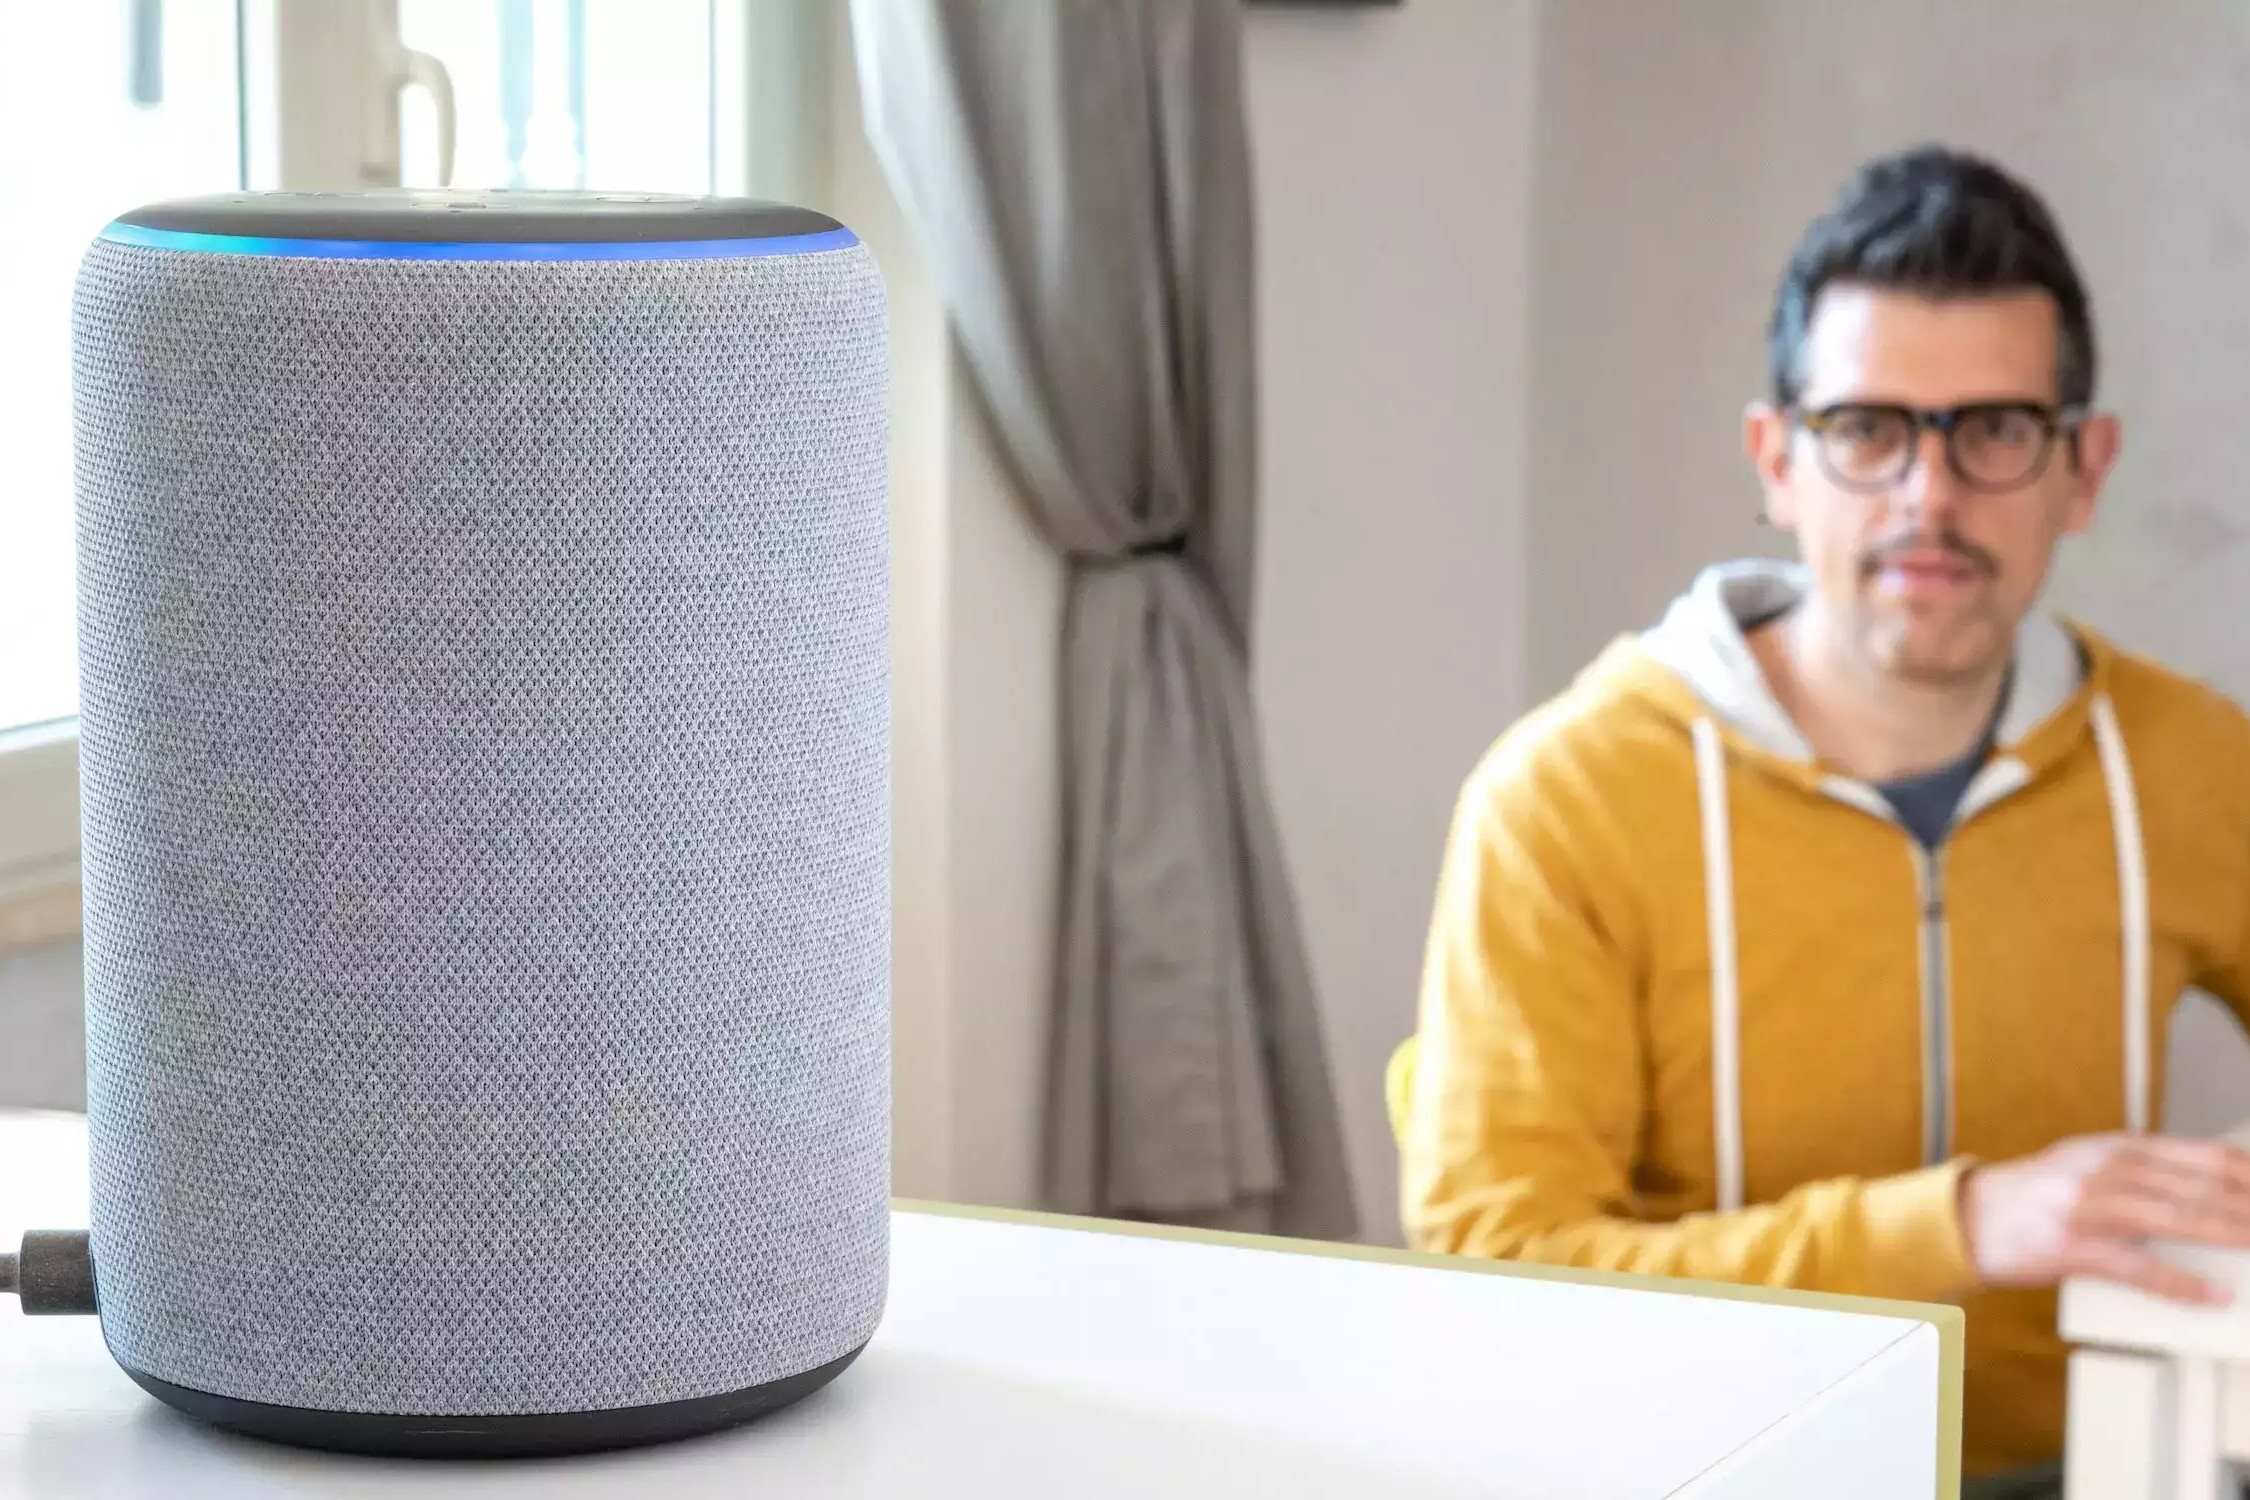 How To Use Amazon Echo Without Wi-Fi